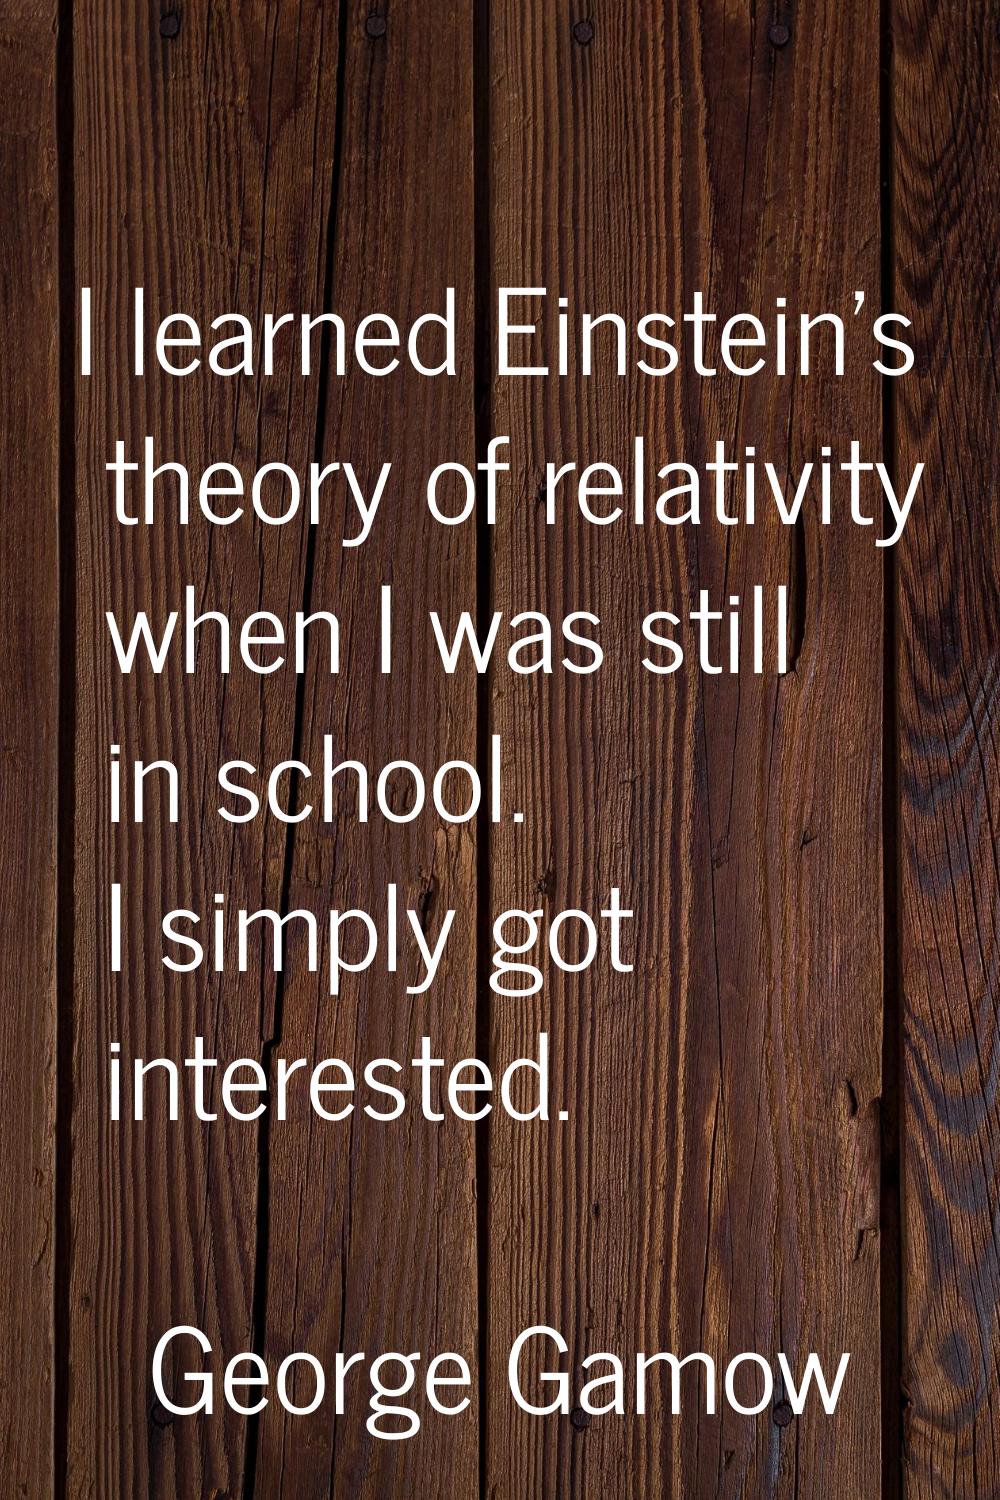 I learned Einstein's theory of relativity when I was still in school. I simply got interested.